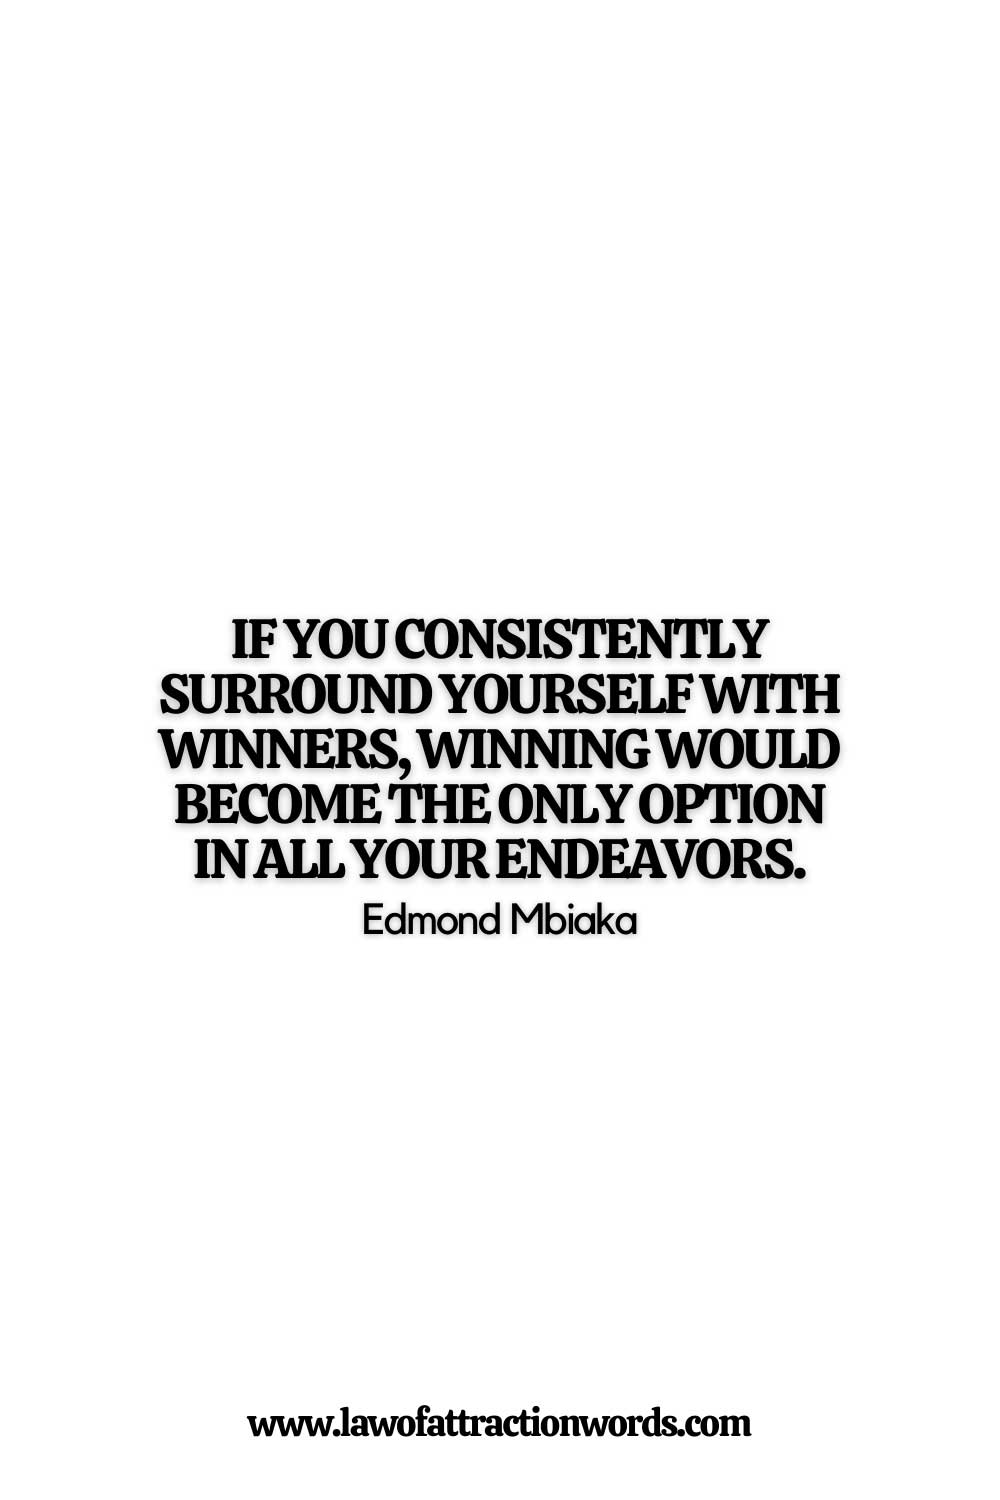 Surround Yourself With Winners Quotes To Boost Mindset